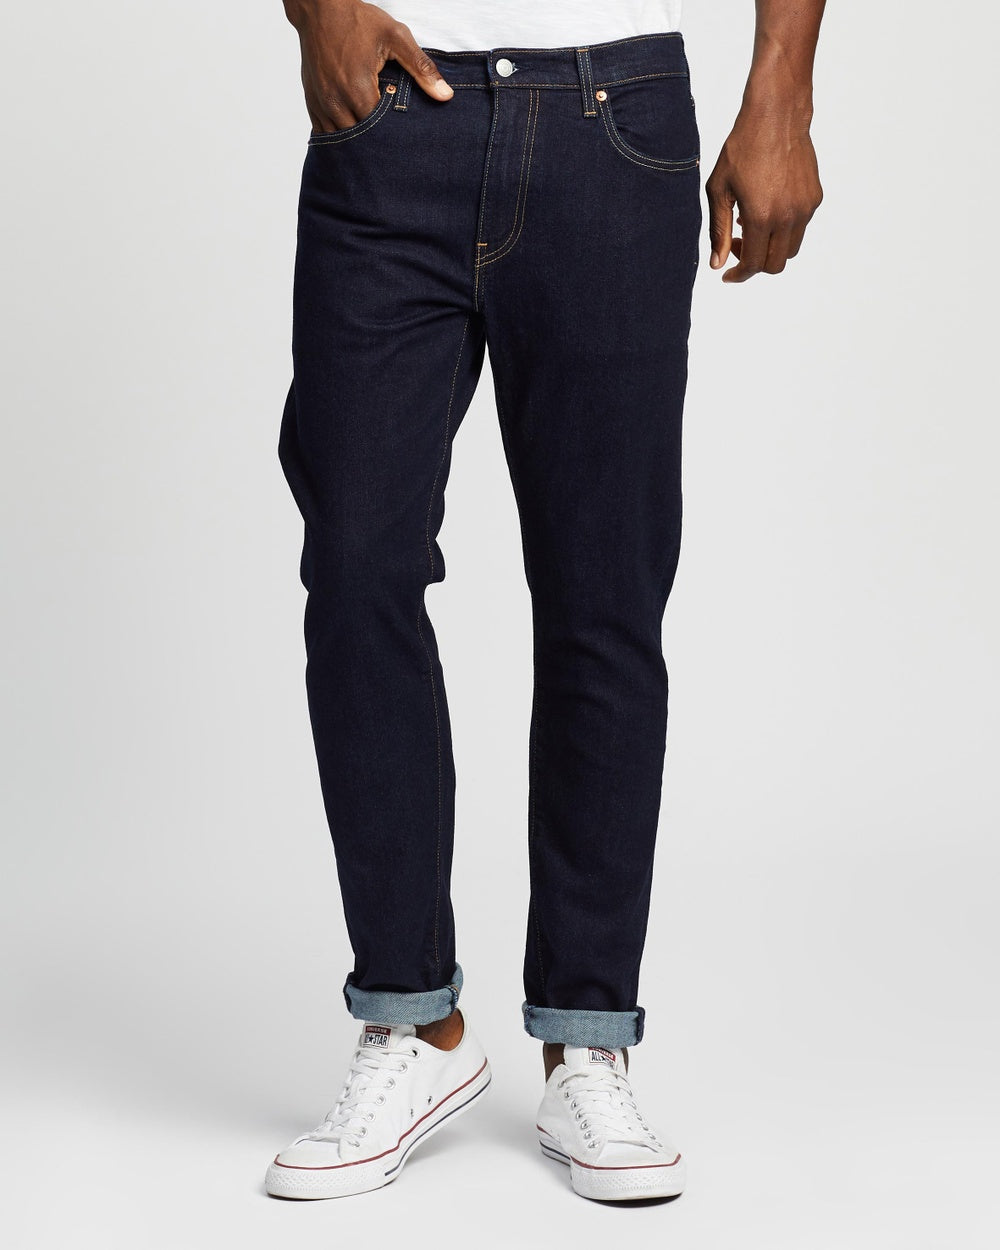 Jeans in your perfect dark indigo blue which pairs best with Autumn colours.